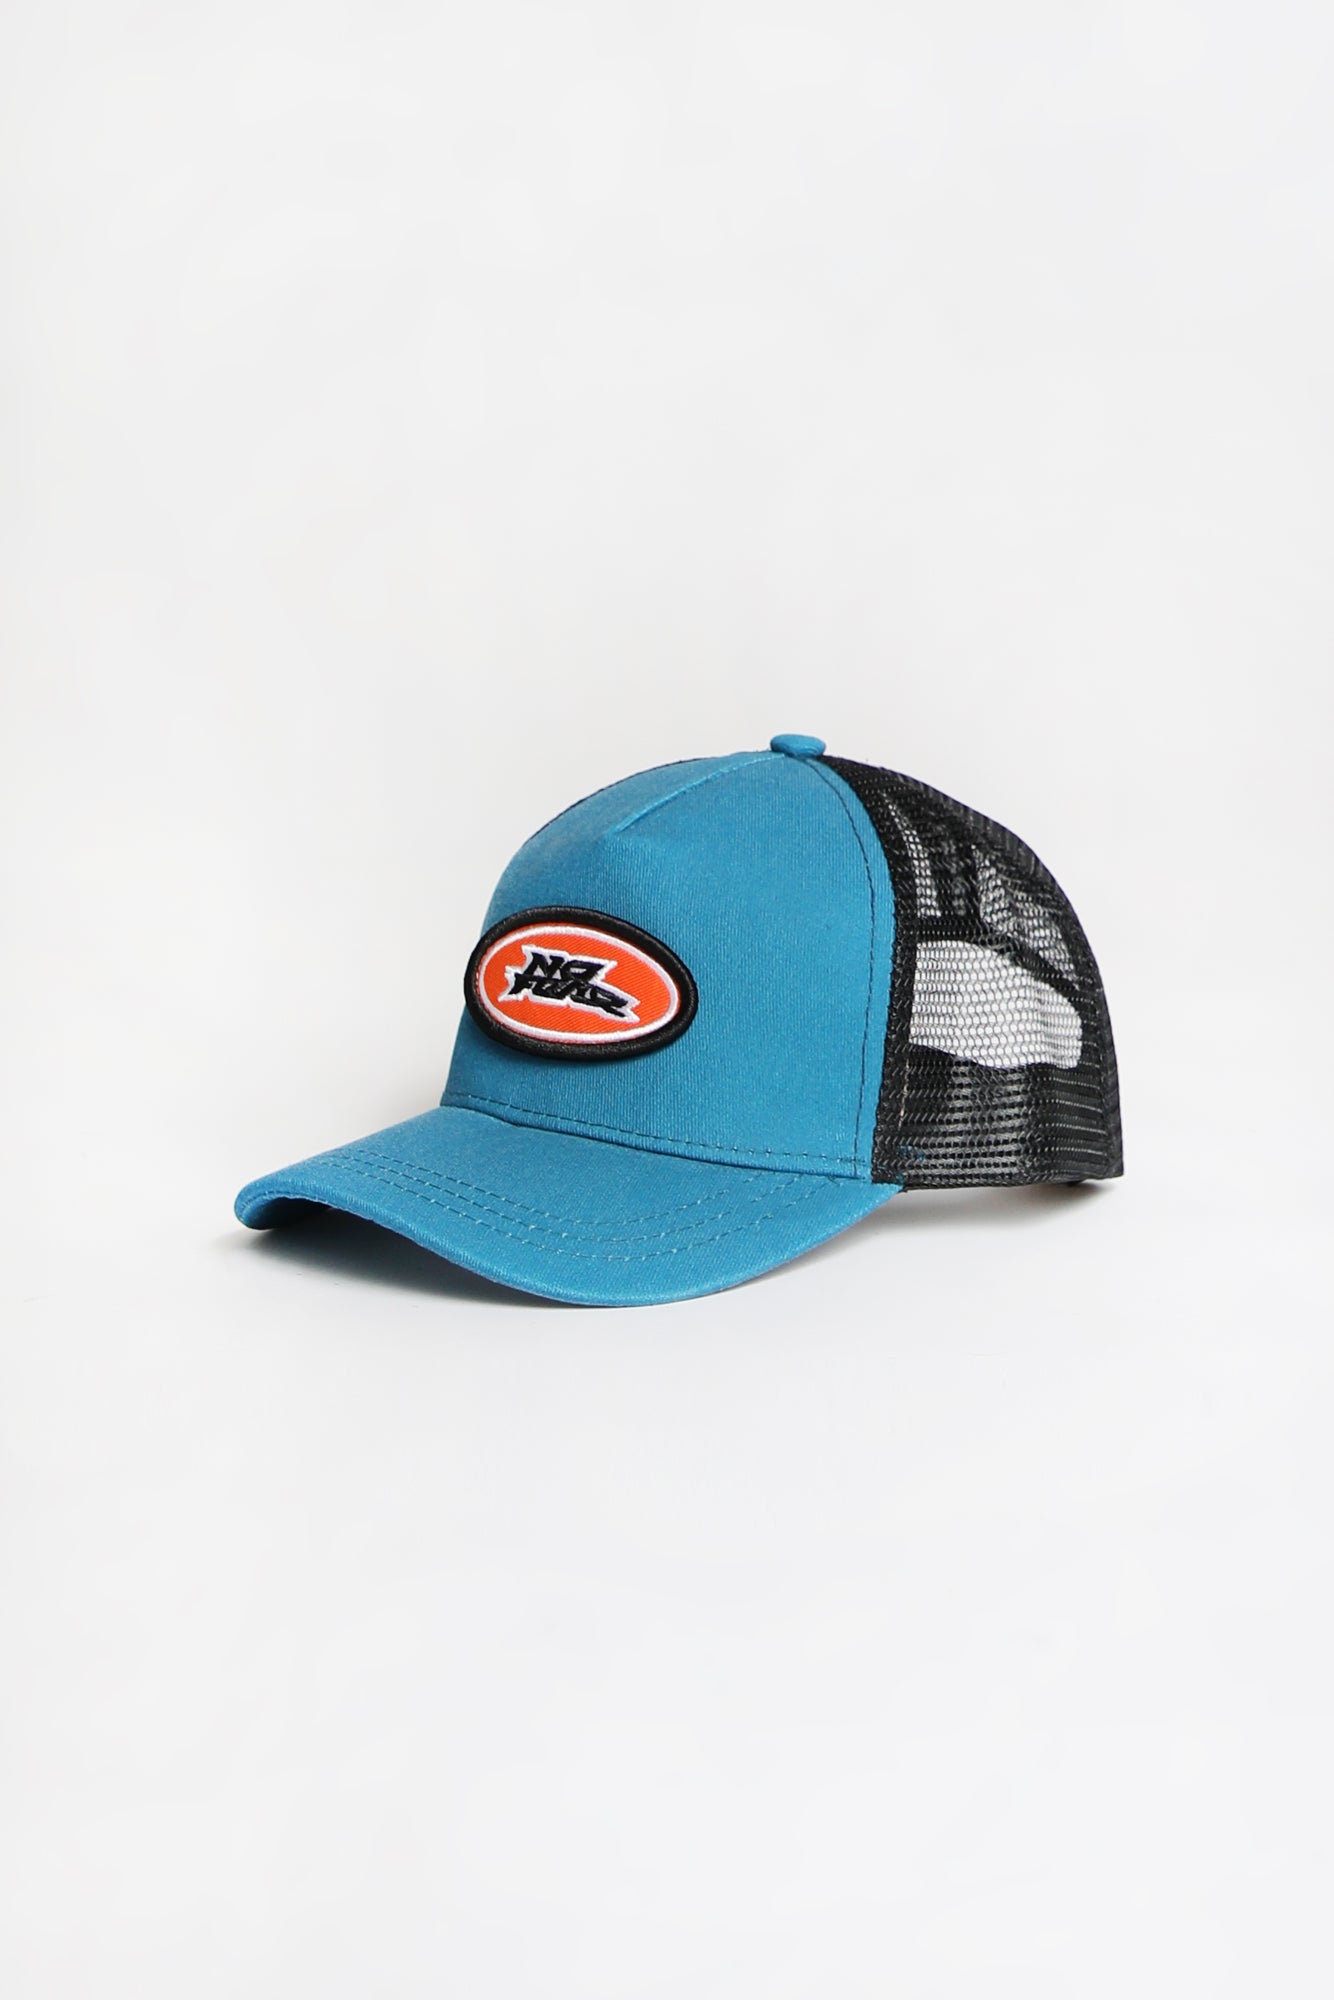 No Fear Youth Patch Trucker Hat - Teal / O/S